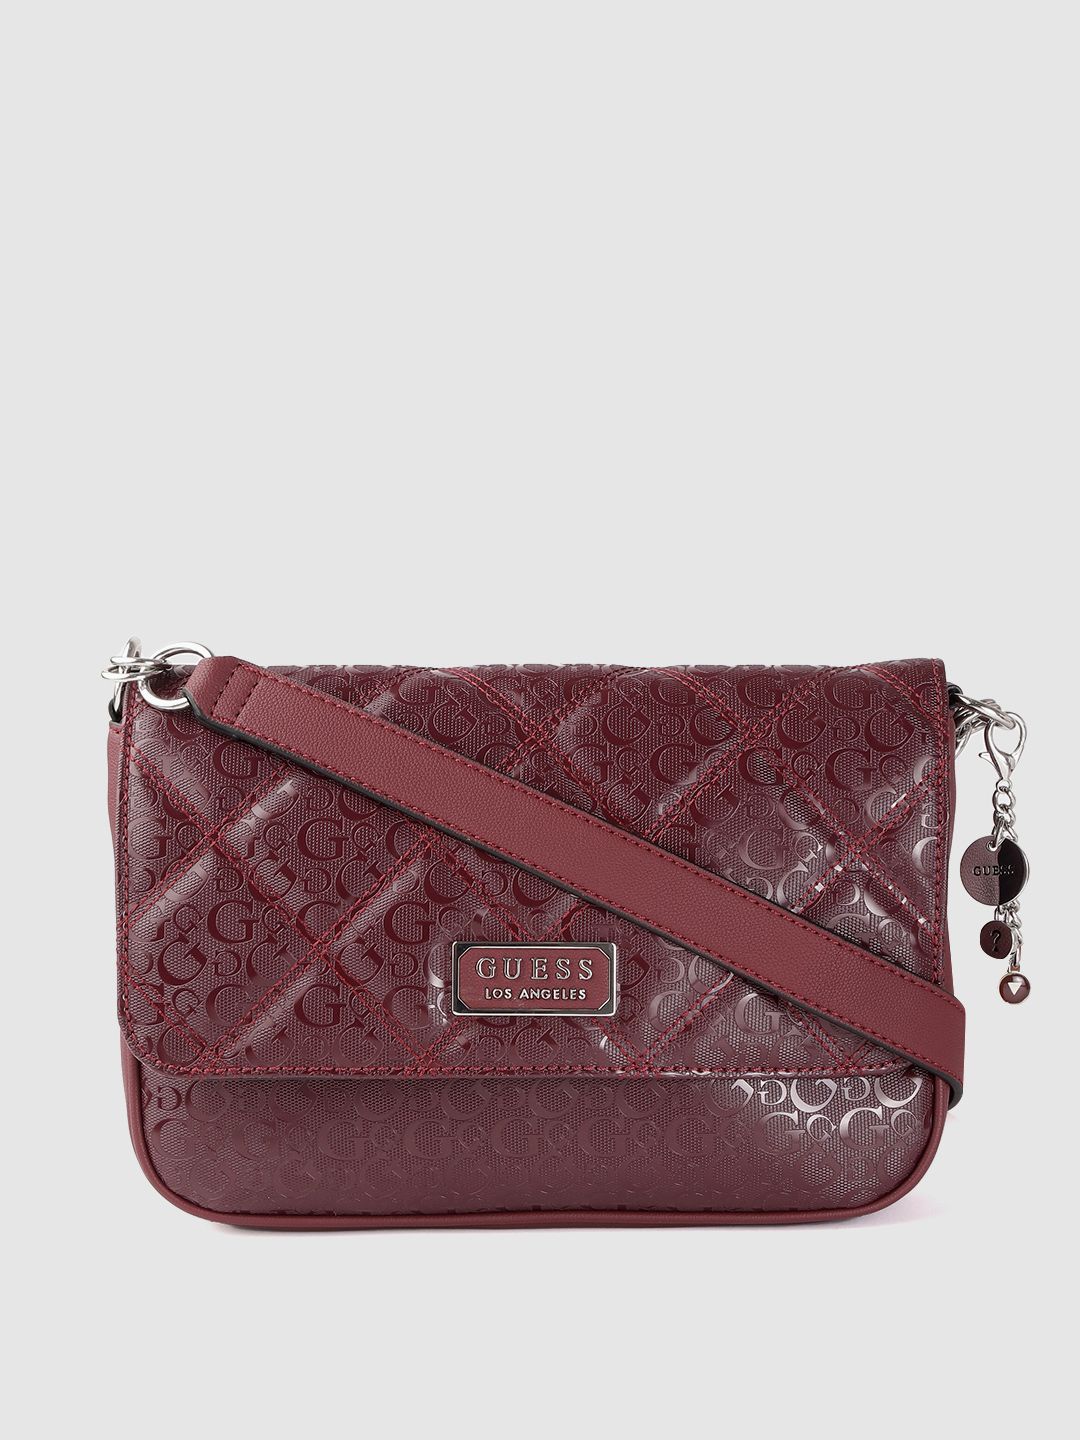 GUESS Women Maroon Brand Logo Textured Structured Sling Bag Price in India